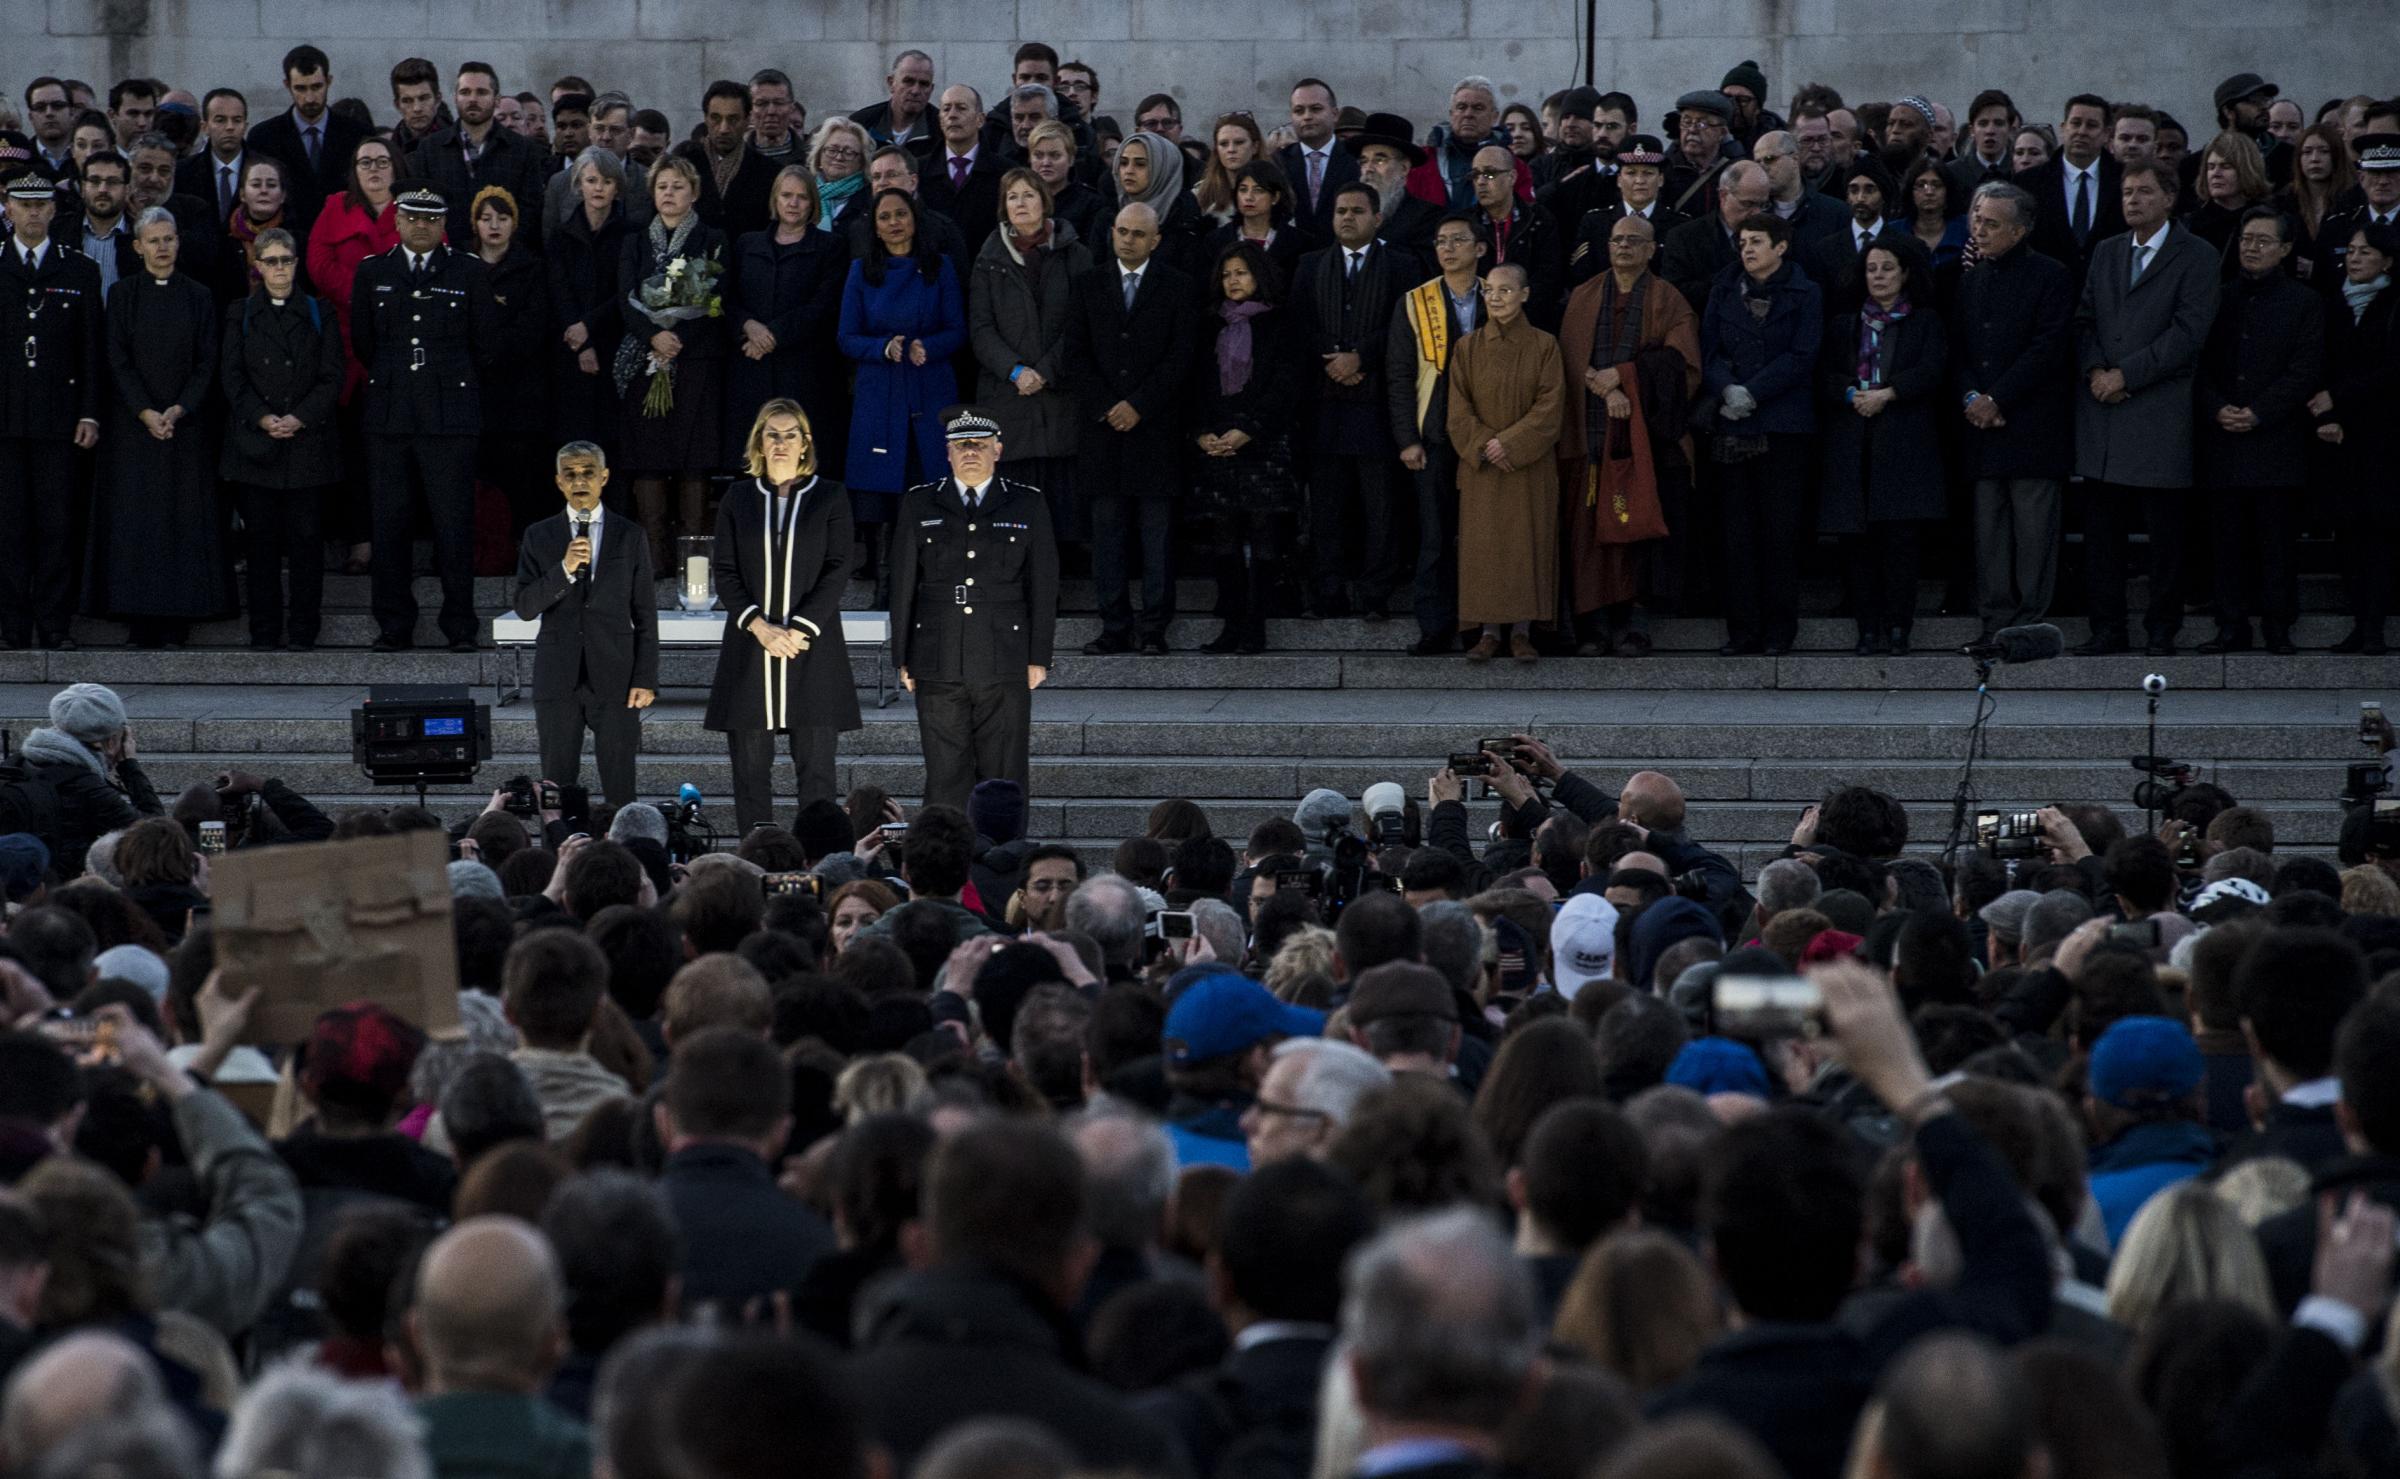 Thousands gather for vigil in Trafalgar Square for those killed in terrorist attack outside Parliament